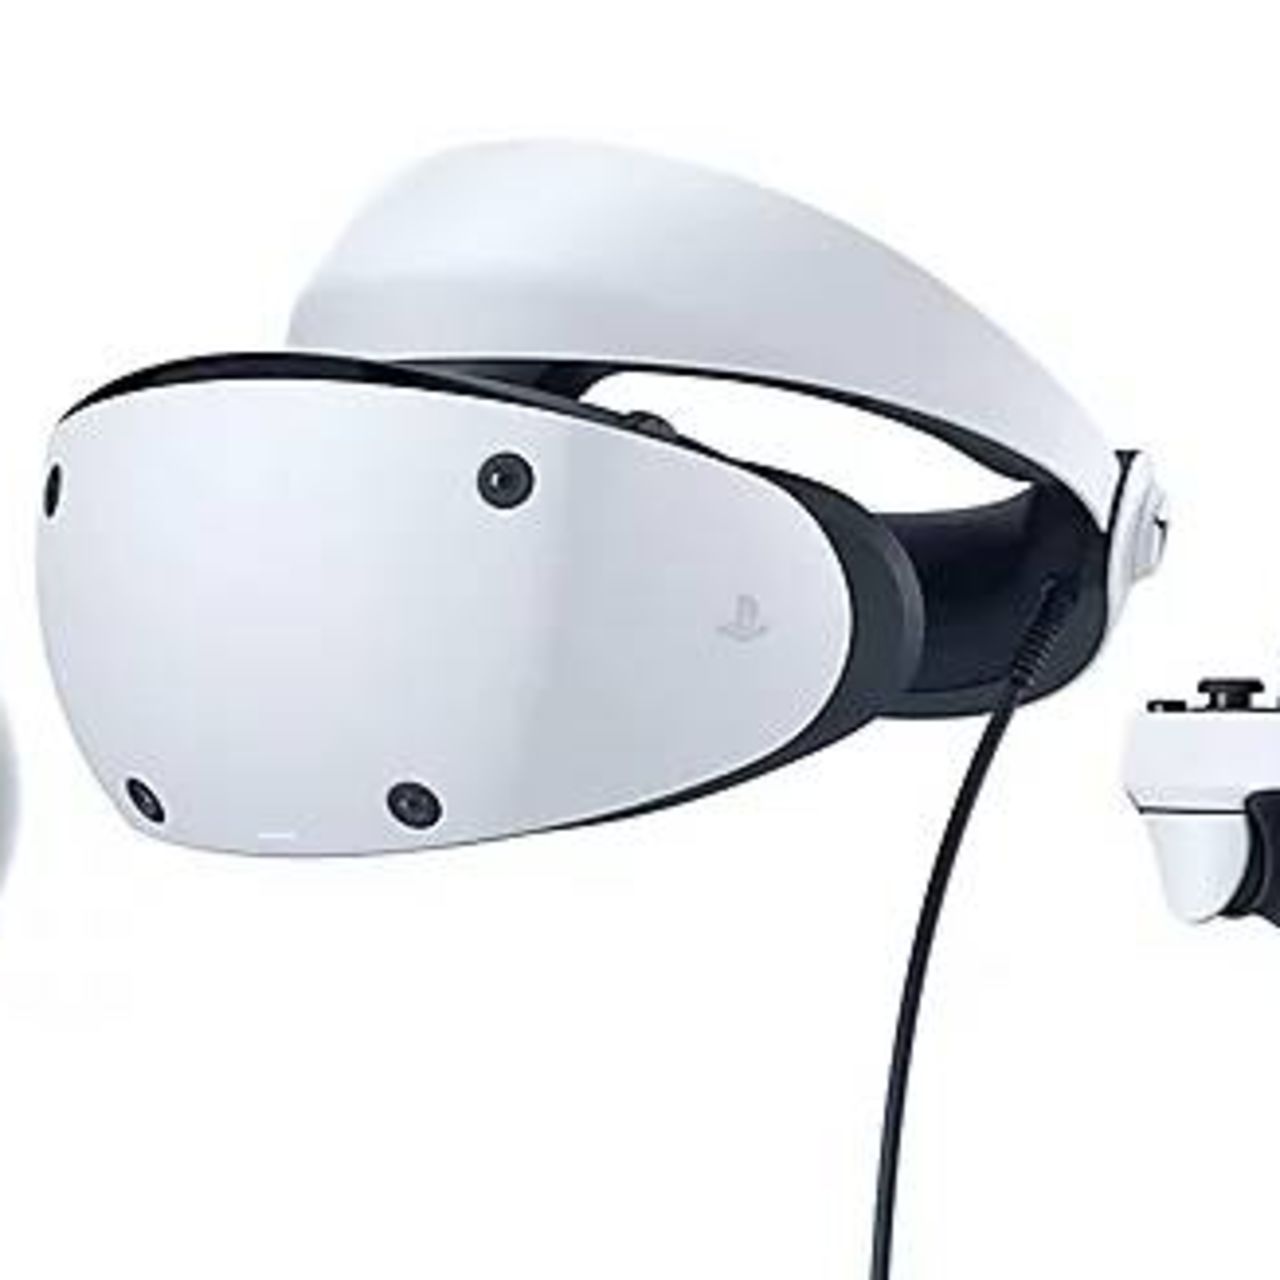 Original Sony PlayStation VR2 Virtual Reality Headset VR Headset 3D VR  Glasses Applicable To Playstation 5 Sony PS5 PS Console